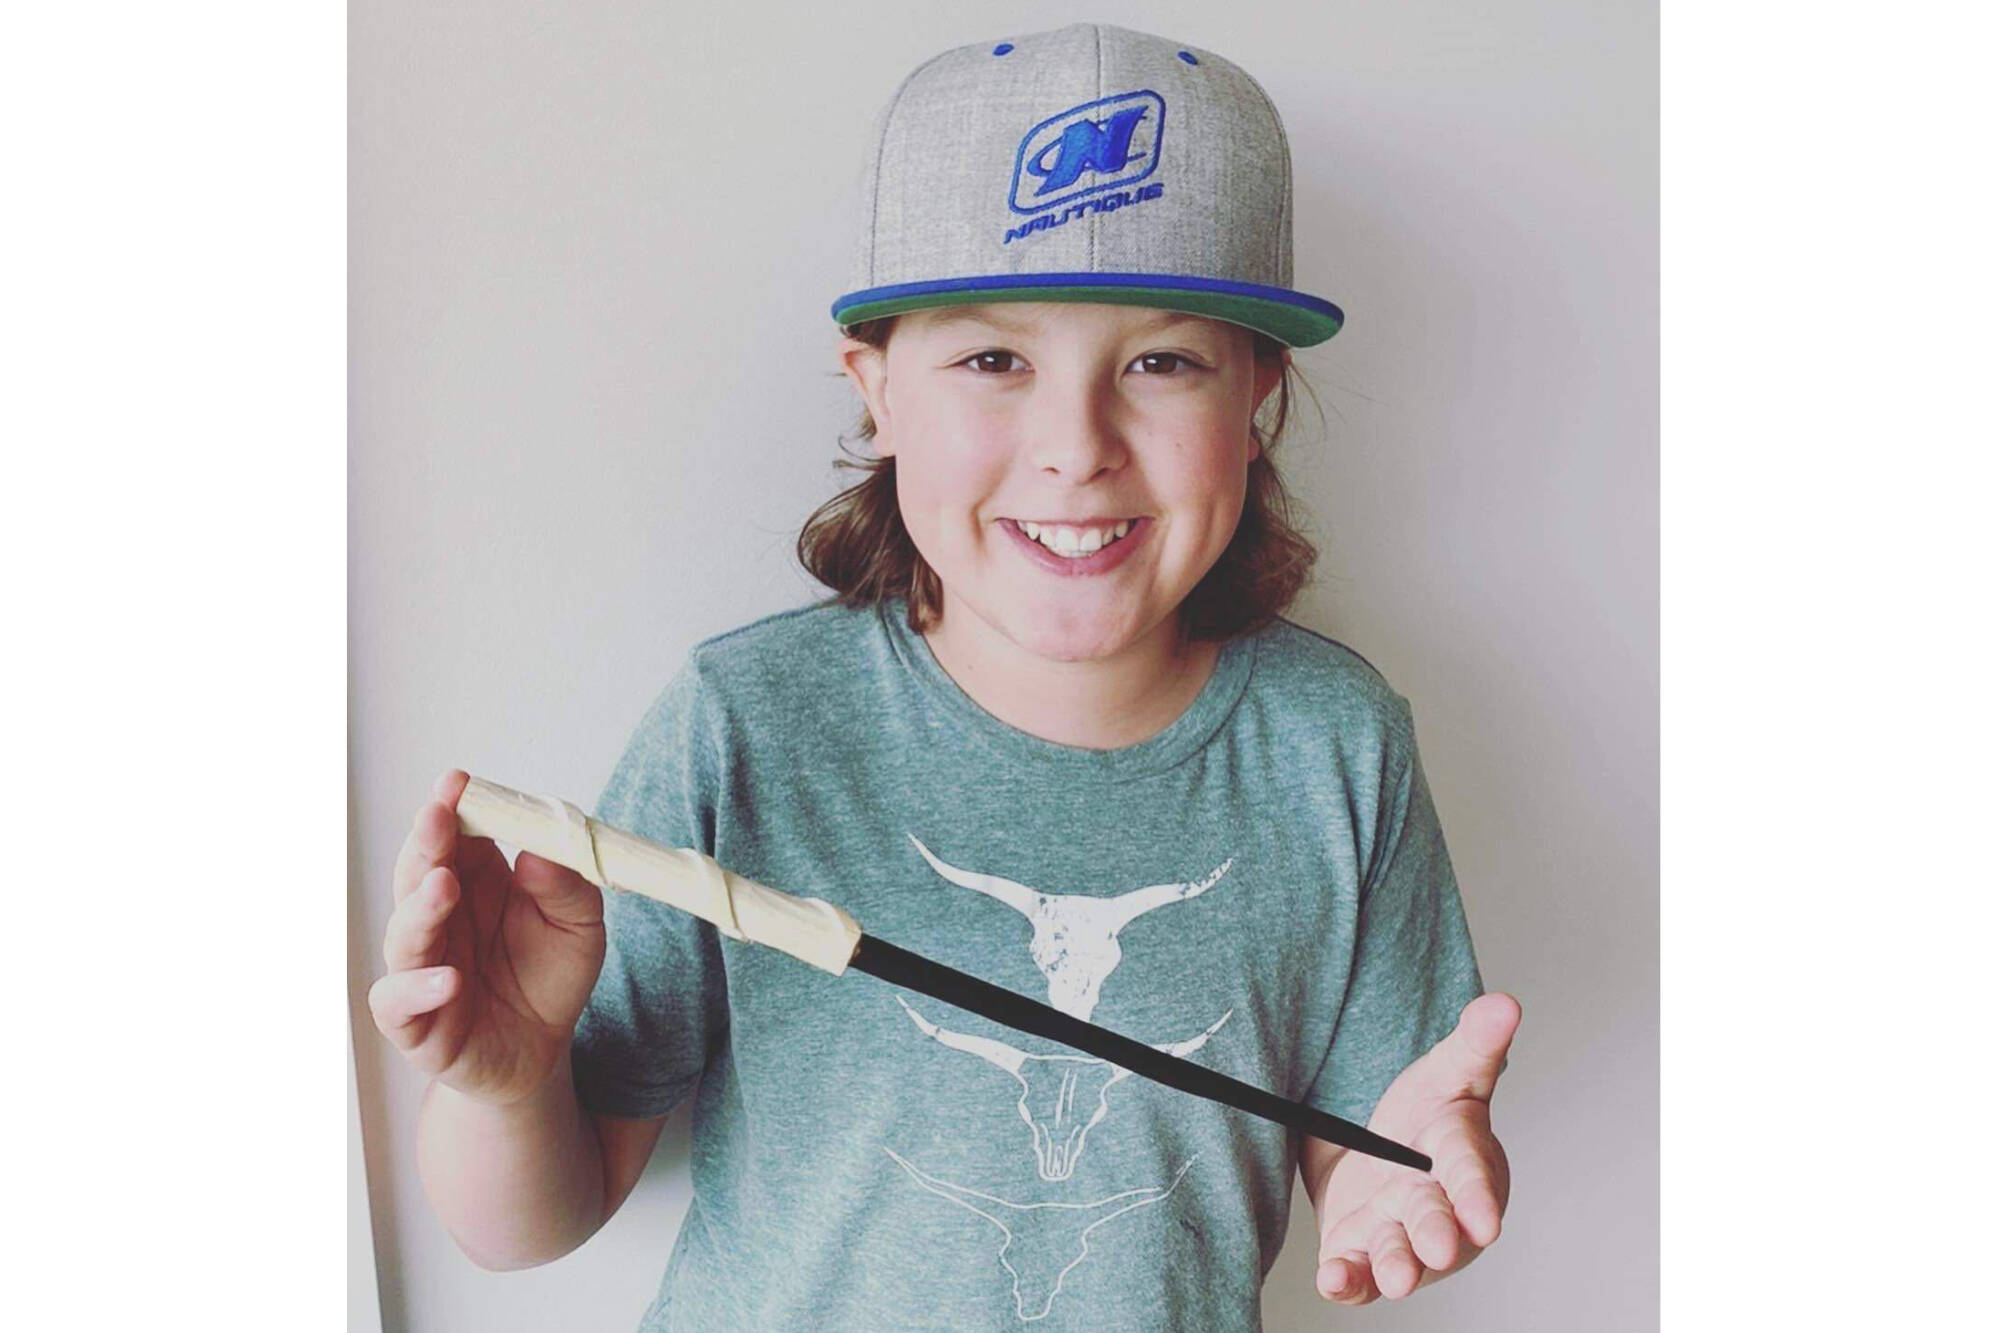 Rocklin Broad, 11, hand-carves wooden wands out of sticks he finds in his backyard in Lake Country. He's now selling them for $10 apiece, and the response to his hobby turned business has been overwhelming. (Submitted photo)